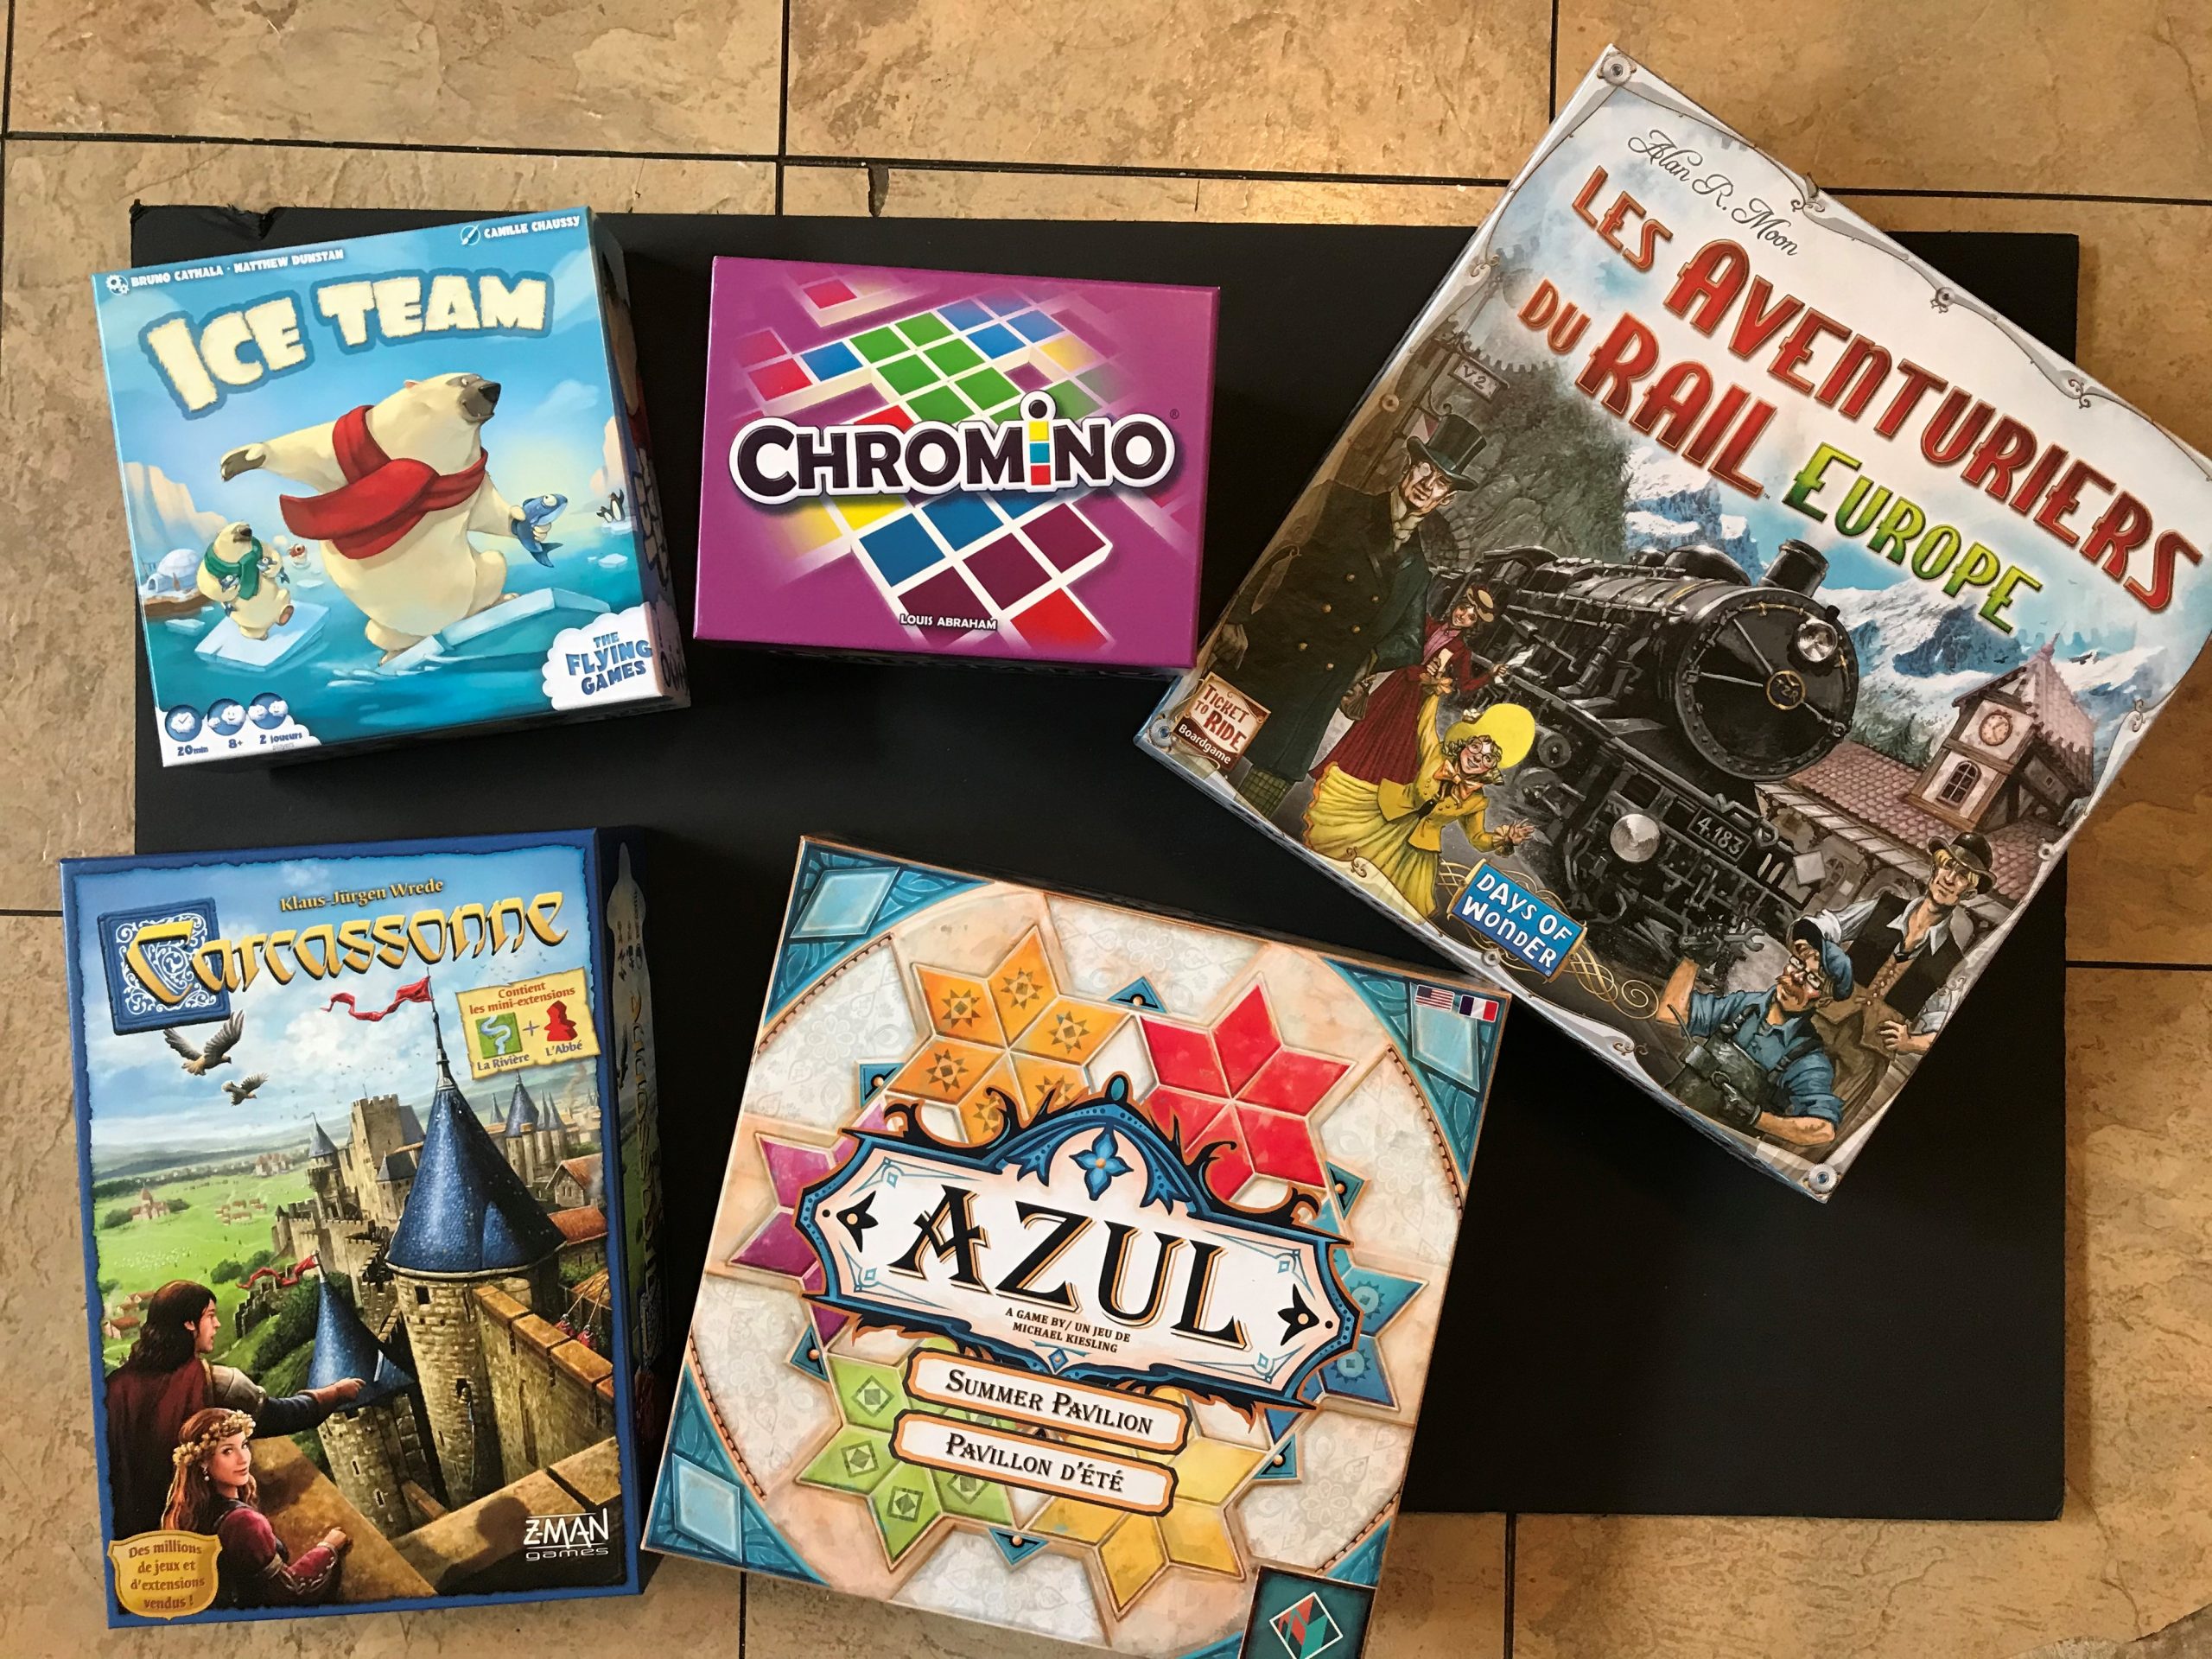 http://mamanbooh.com/wp-content/uploads/2020/07/Jeux-Asmodee-scaled.jpg